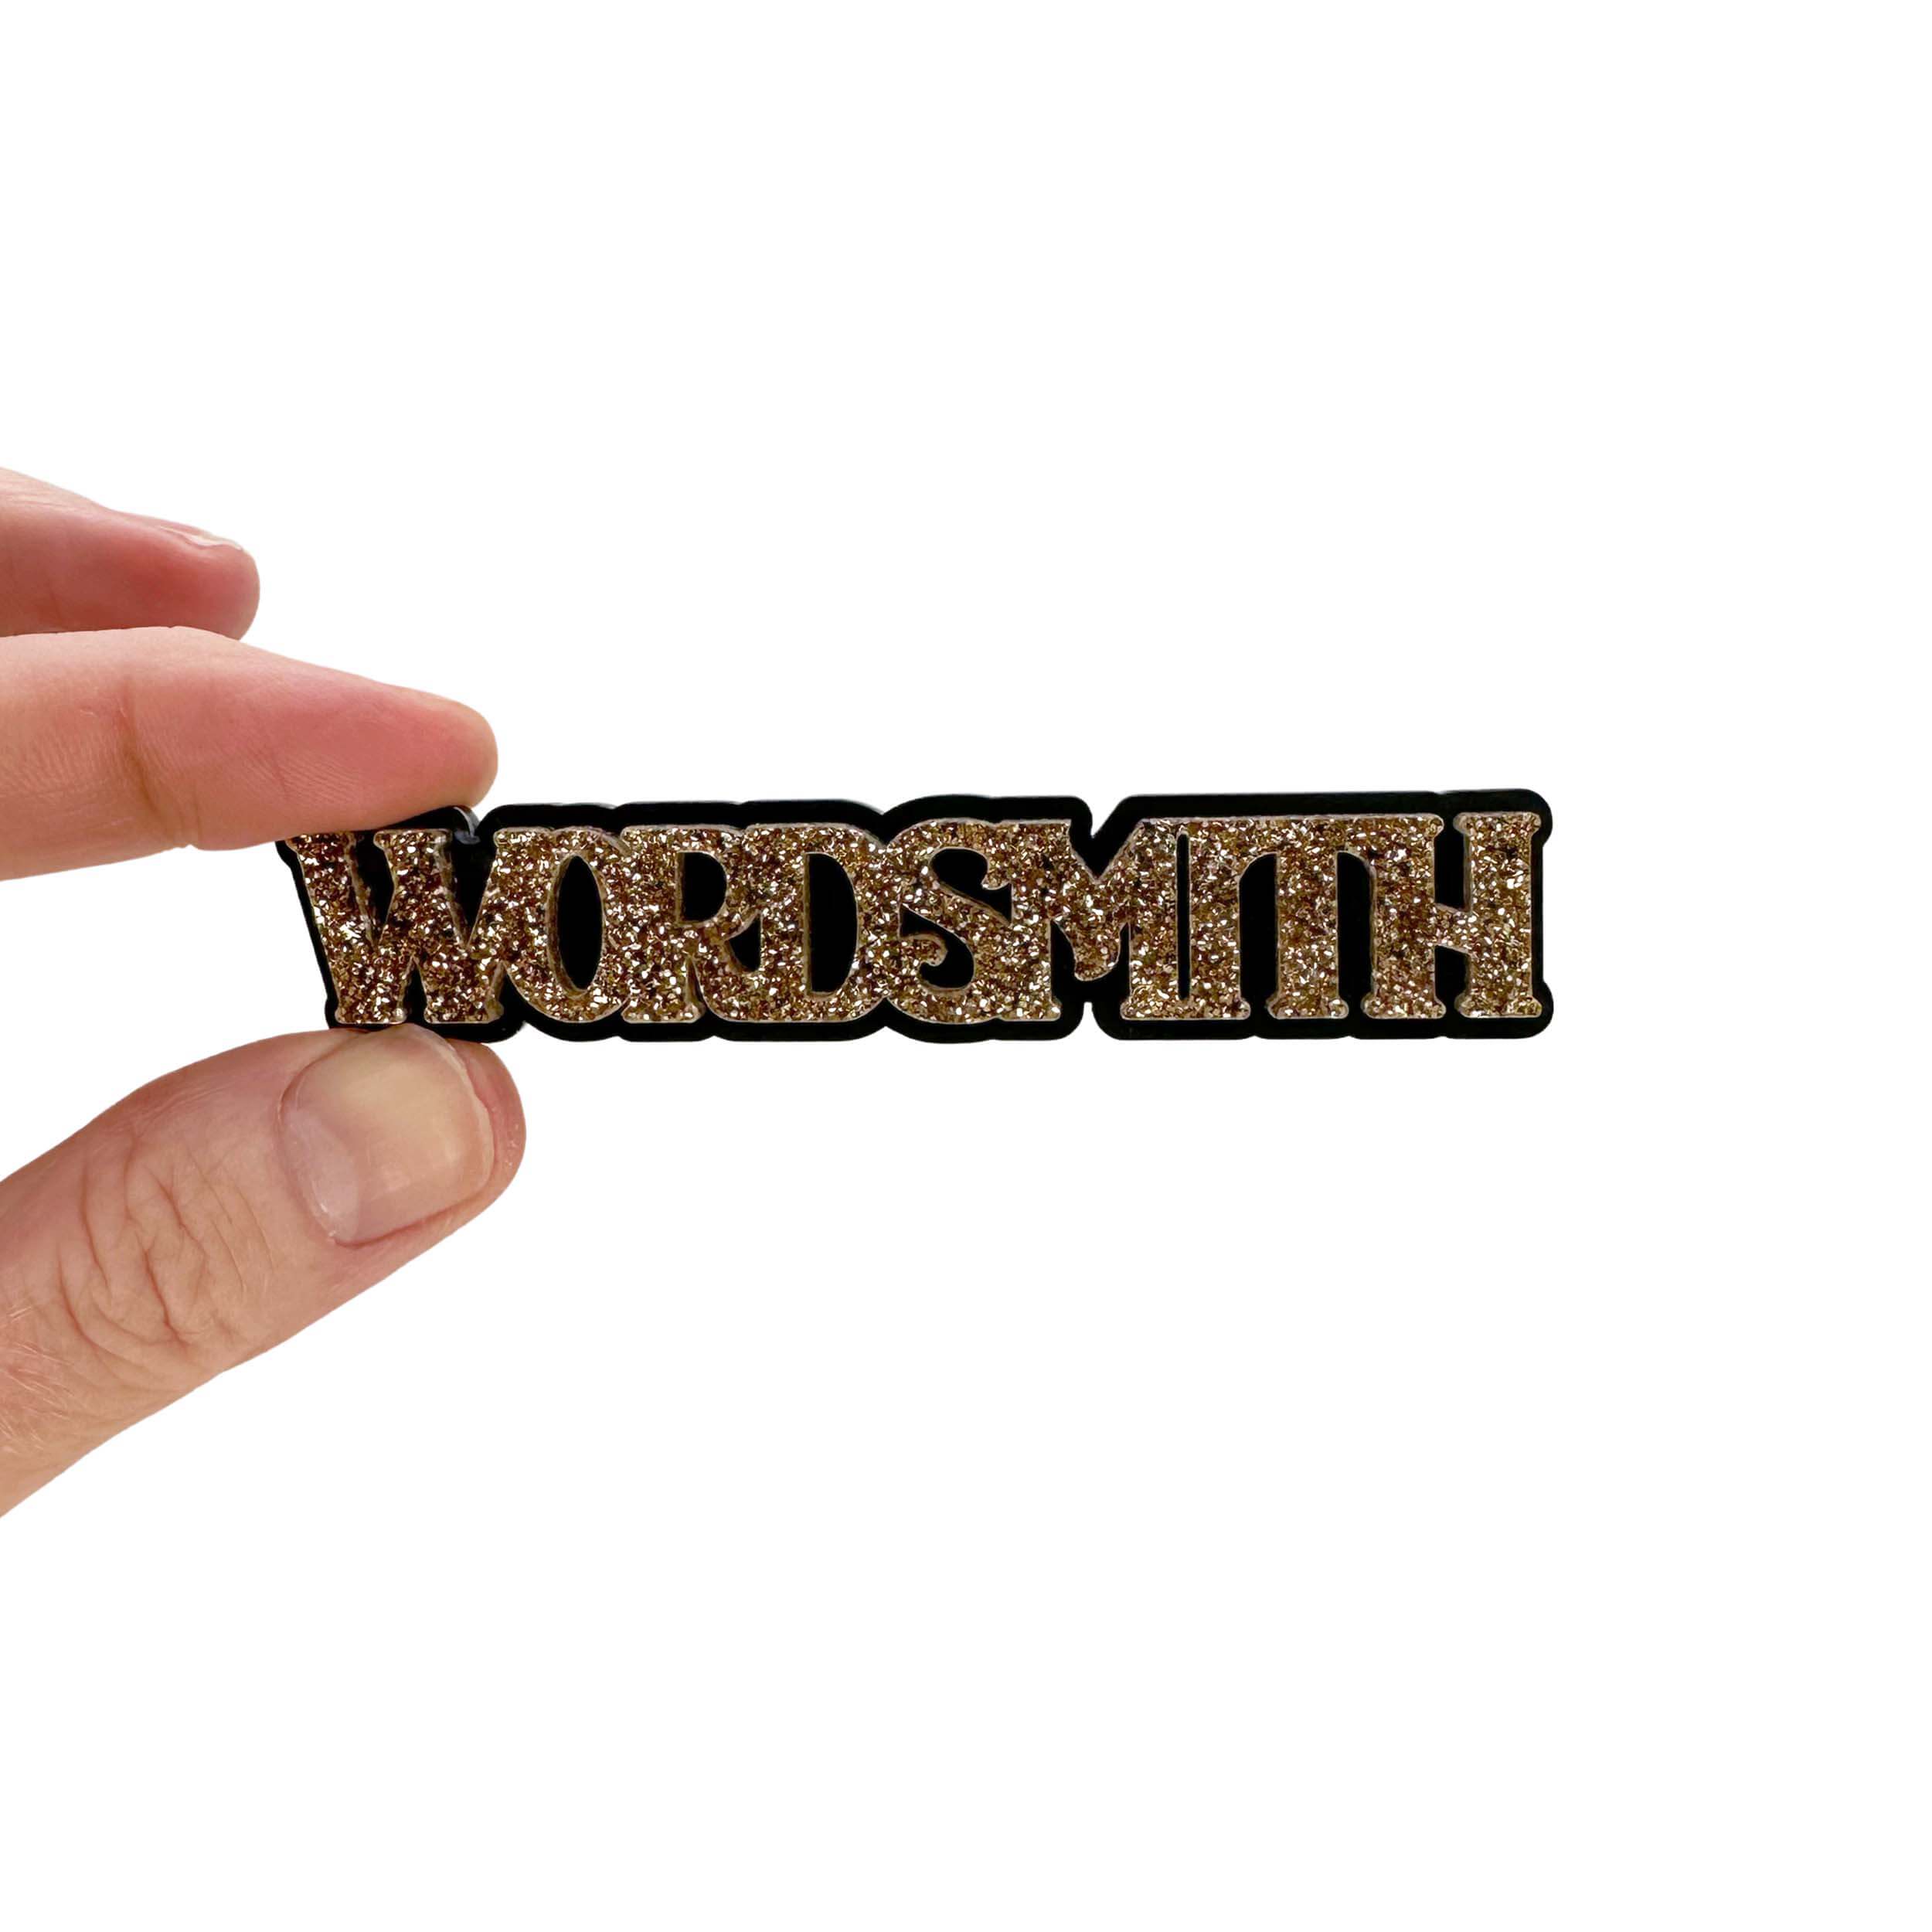 Wordsmith brooch in gold glitter shown held up against a white backround. 